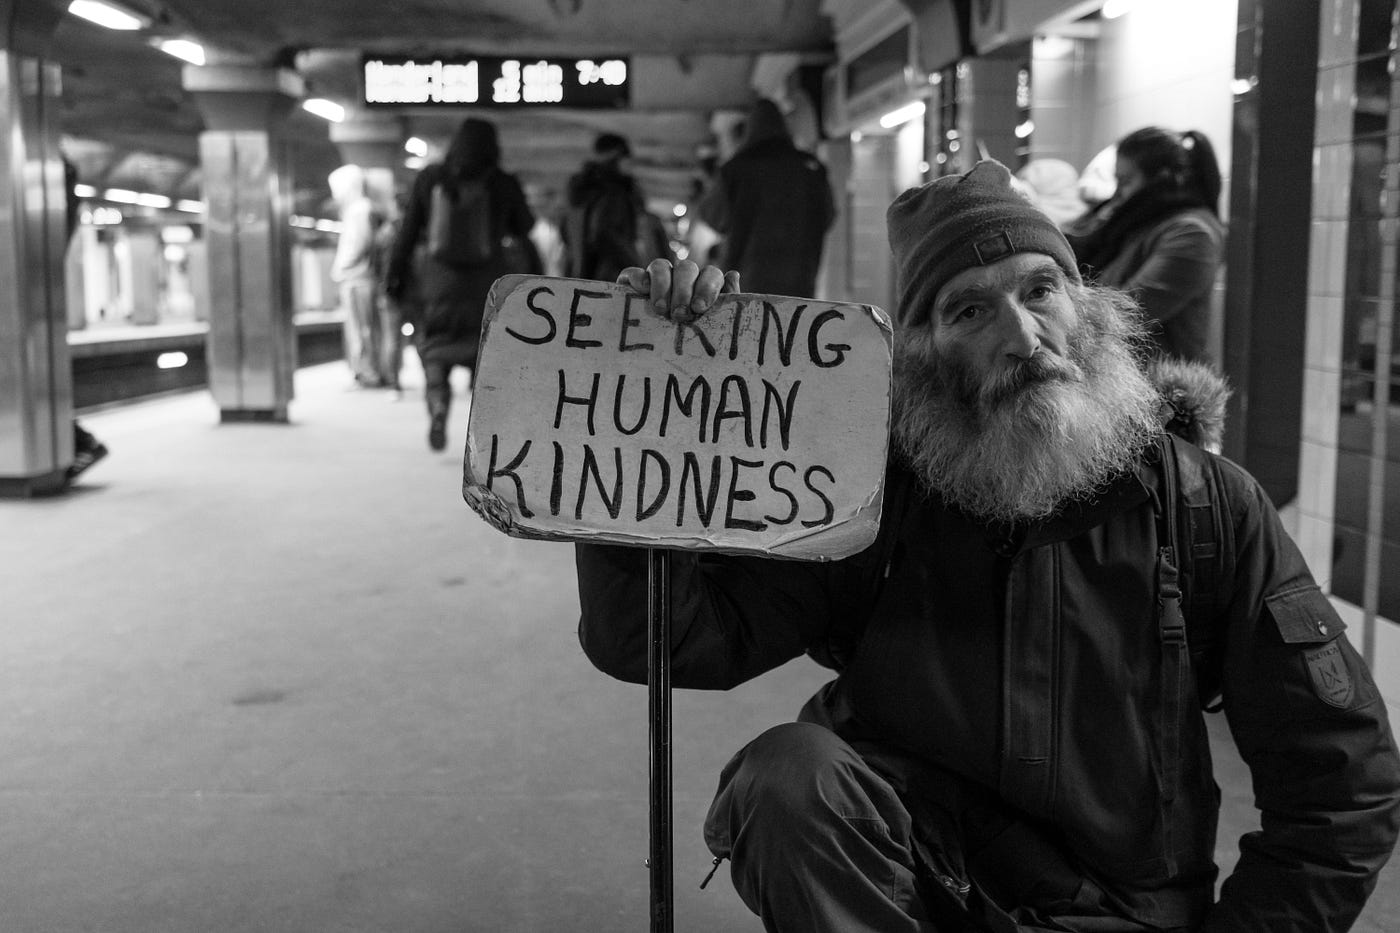 Homeless man holding up a sign that says “Seeking human kindness”